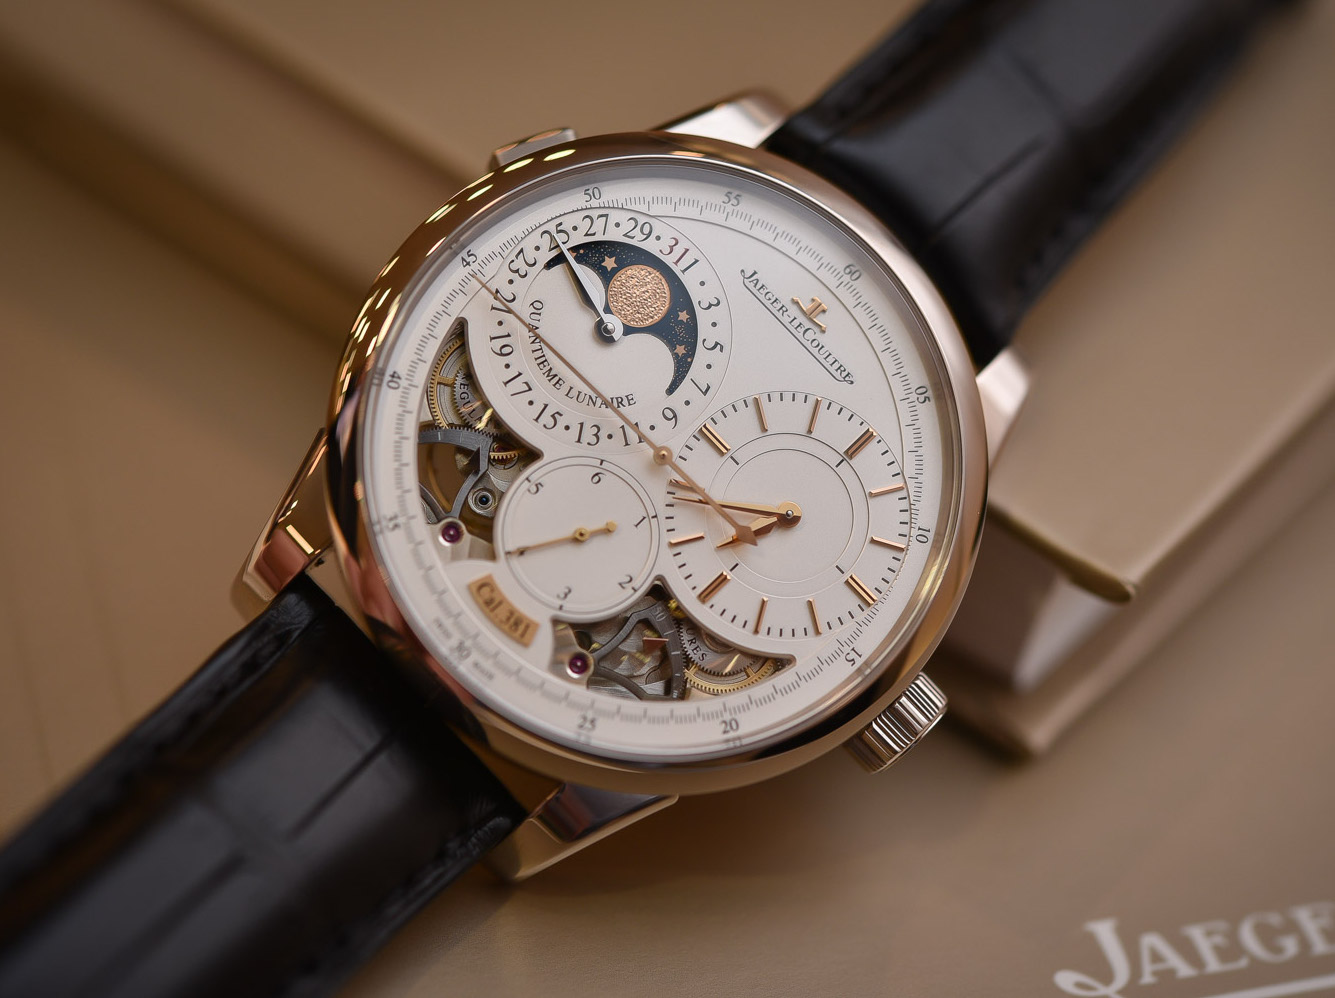 Jaeger-LeCoultre-Duometre-Quantieme-Lunaire-in-white-gold-and-opened-dial-5.jpeg